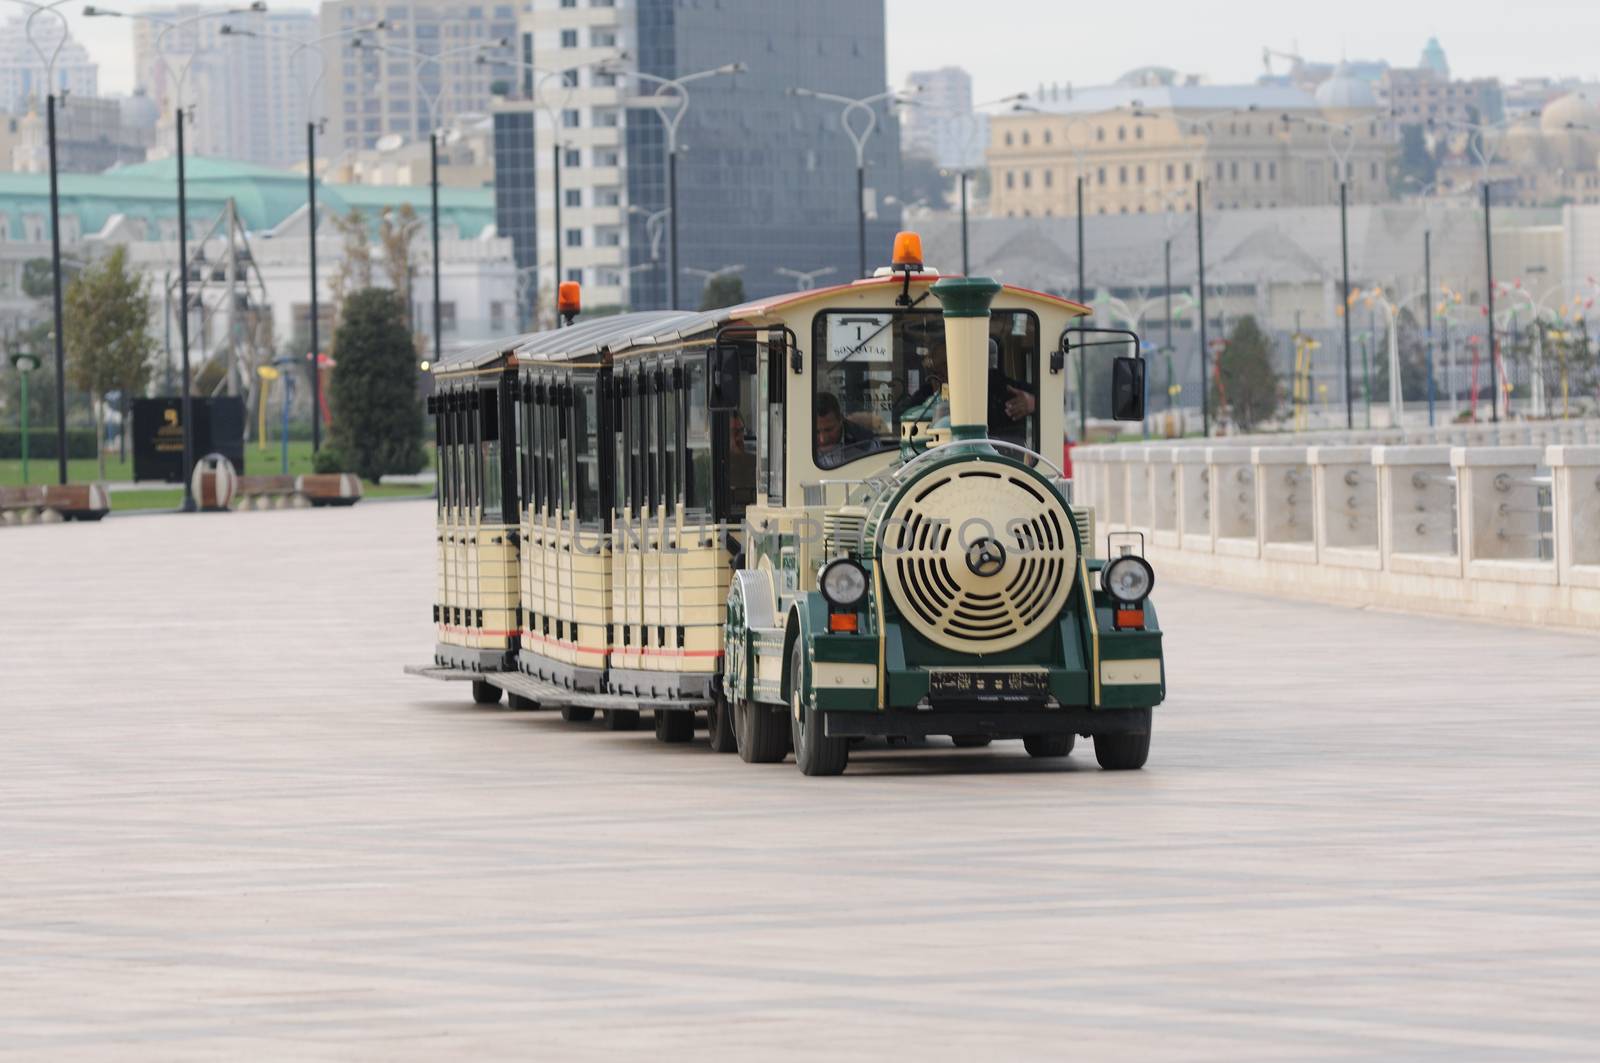 With the help of these wagons,walks on made on the boulevard of the Caspian coast in Baku